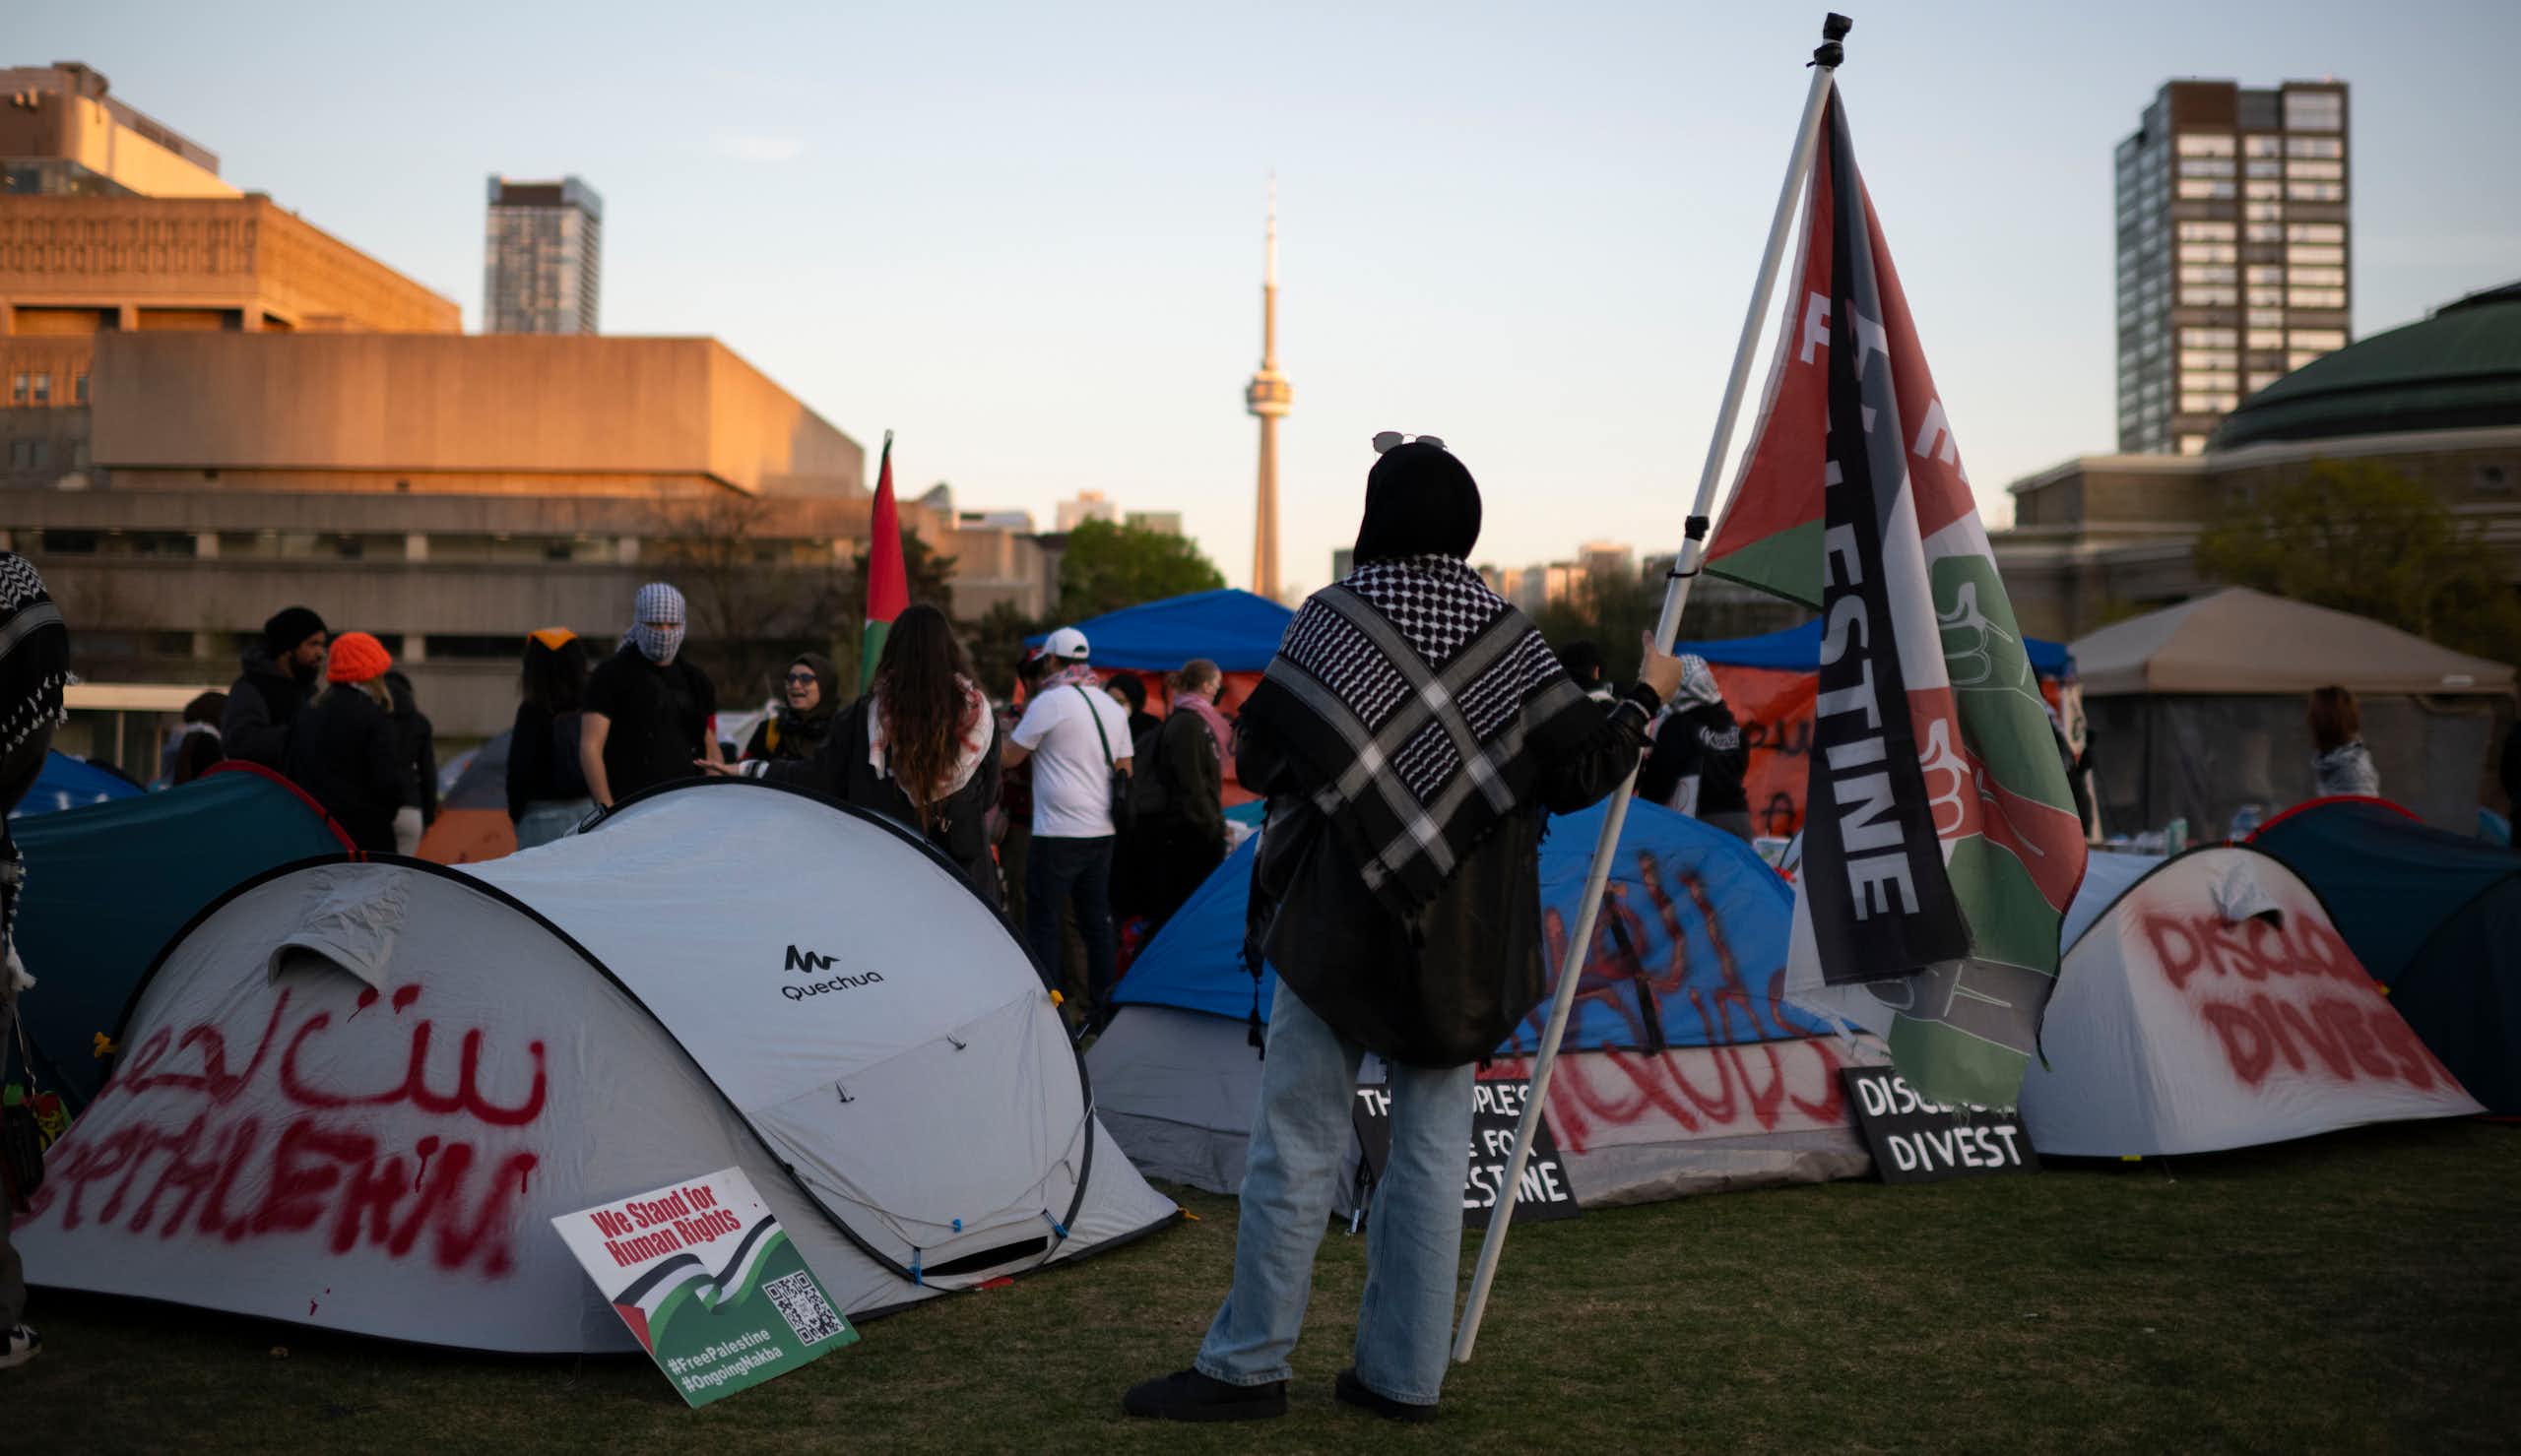 A person seen holding a flag with the end of the word 'Palestine' visible against tents and a Toronto skyline including the CN tower.